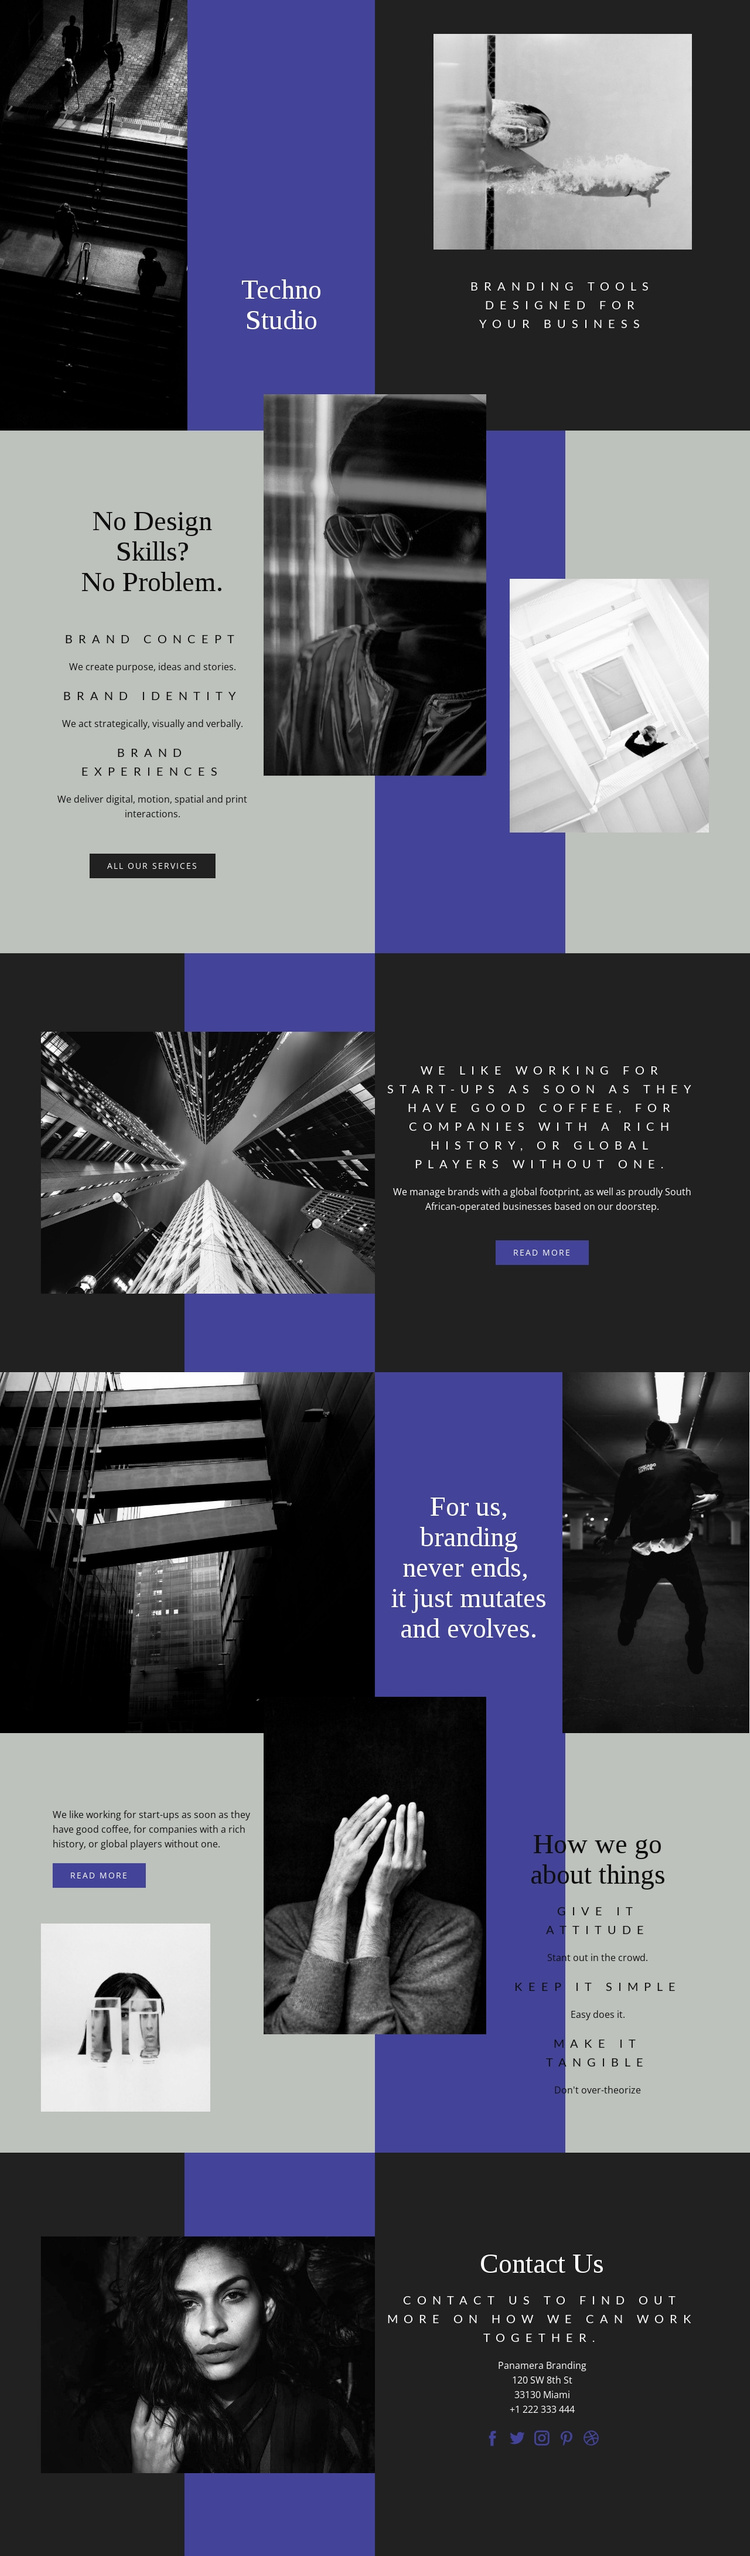 Techno skills in business Website Template